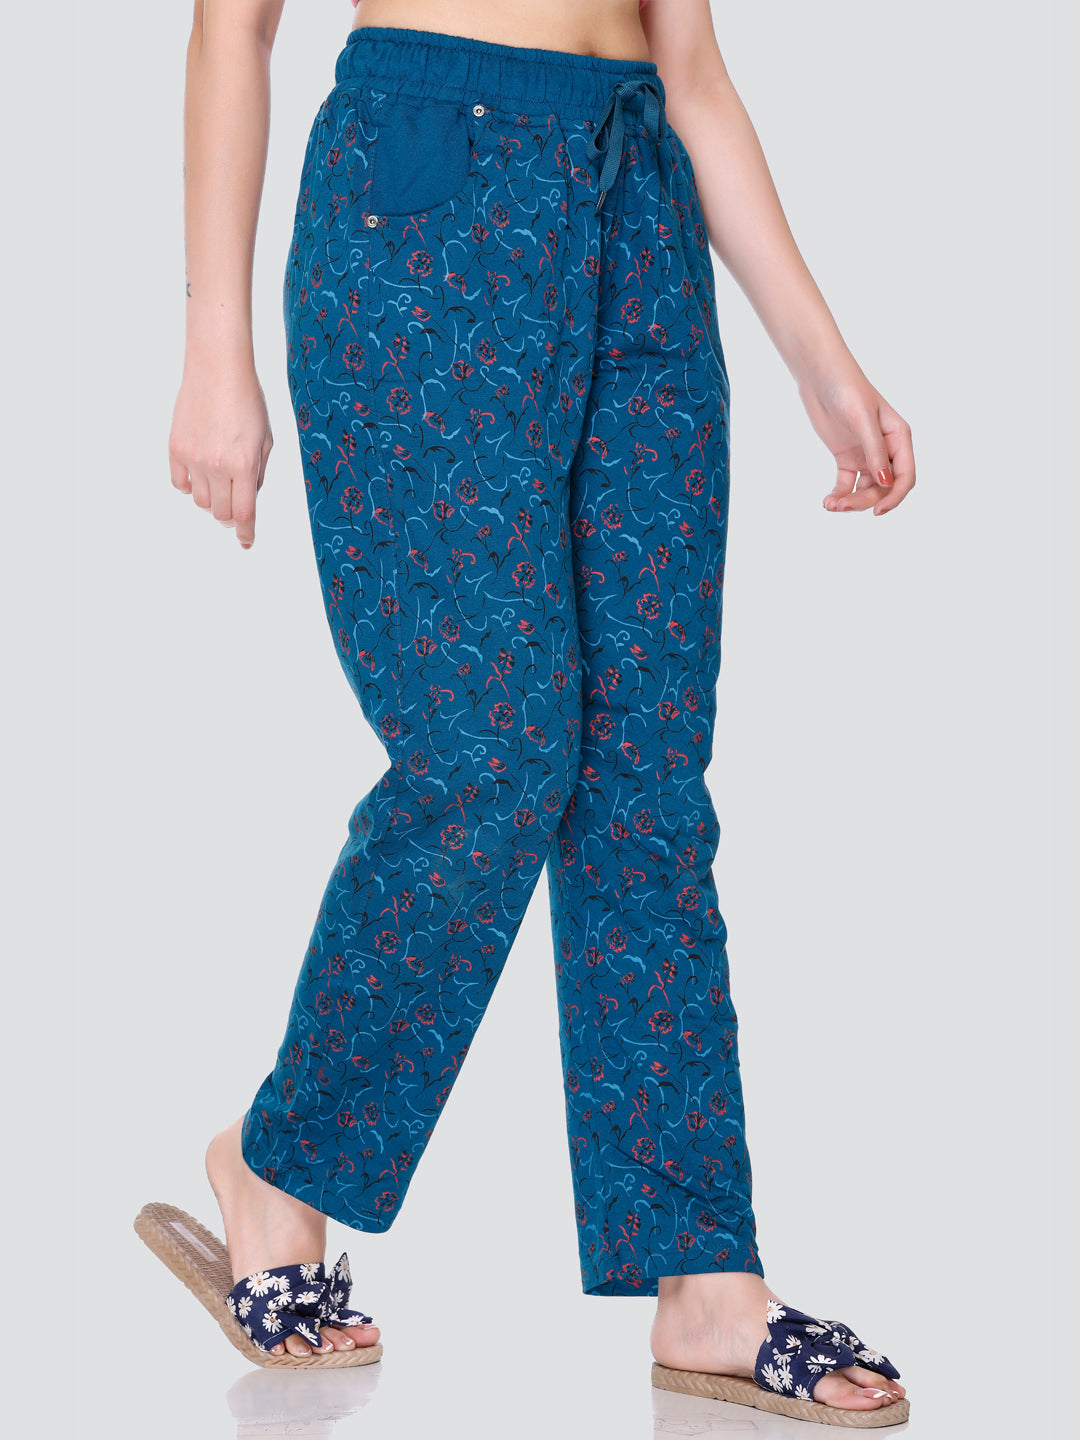 Cupid All Over Printed Night Pajamas for Women ( Teal)